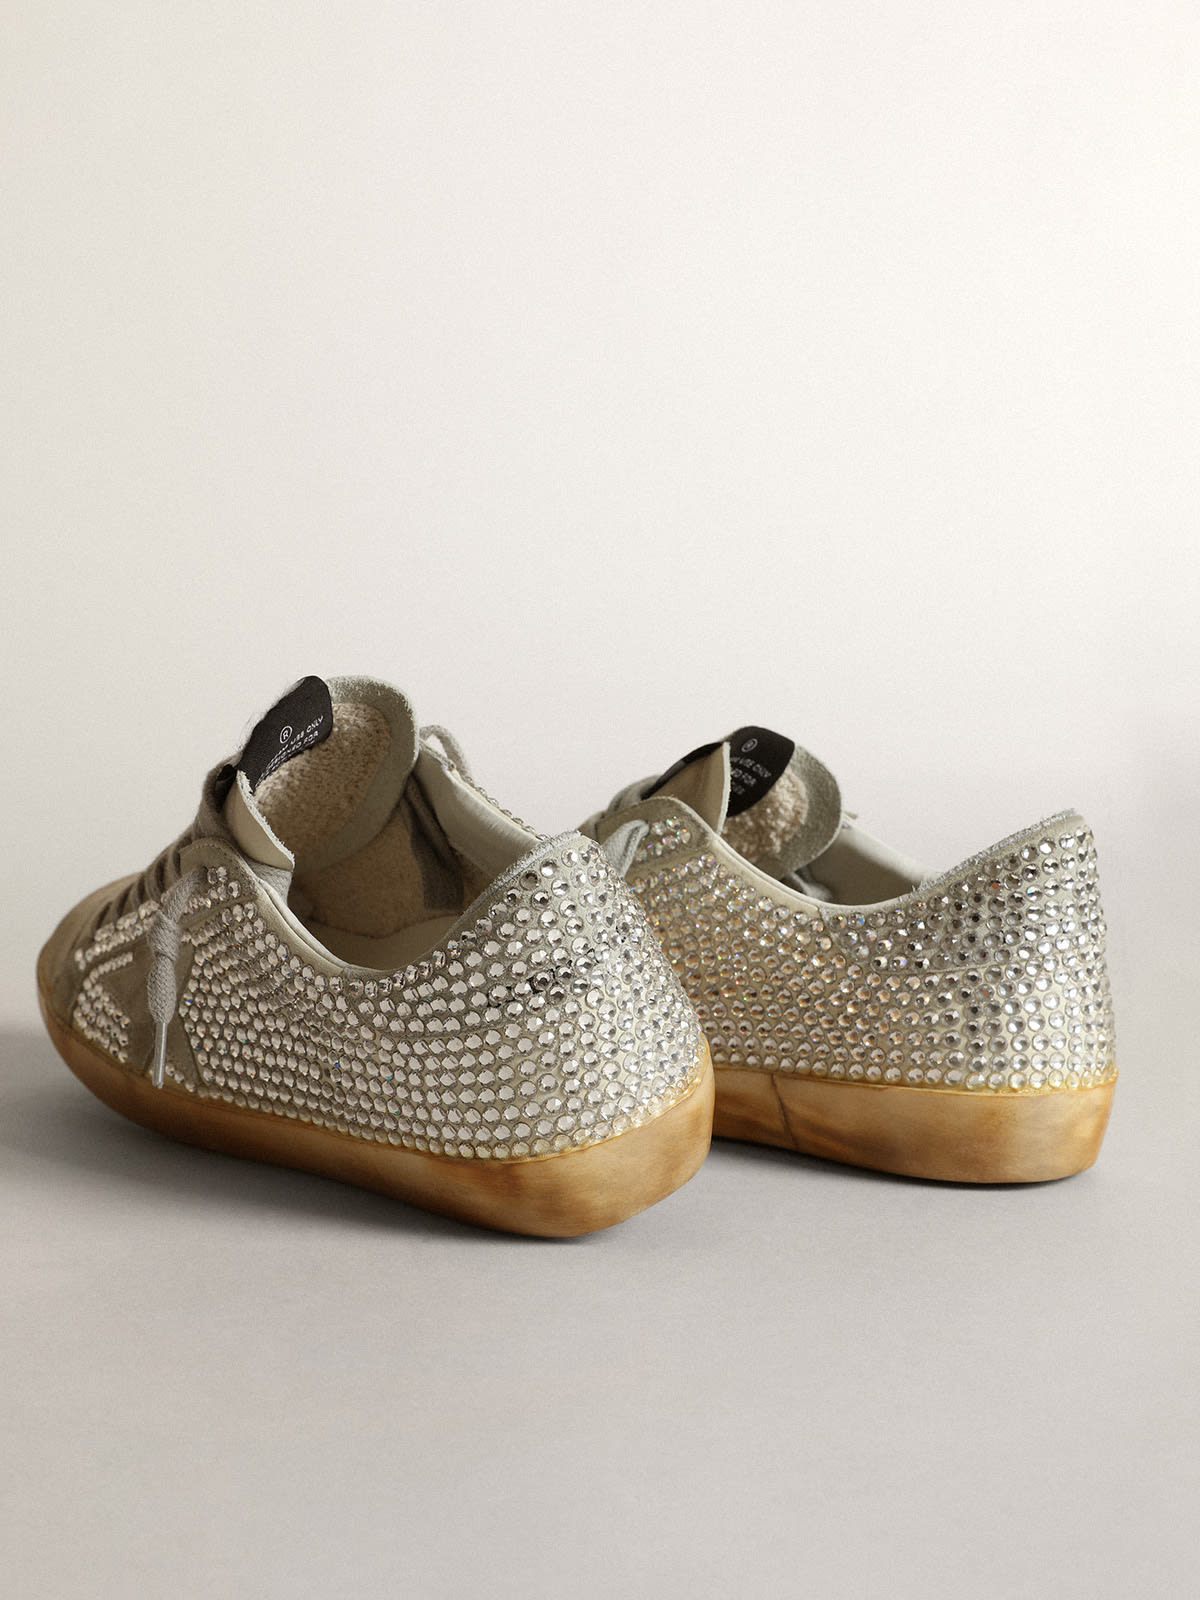 Golden Goose - Super-star sneakers in off-white nubuck and silver crystals with ice-gray suede star in 